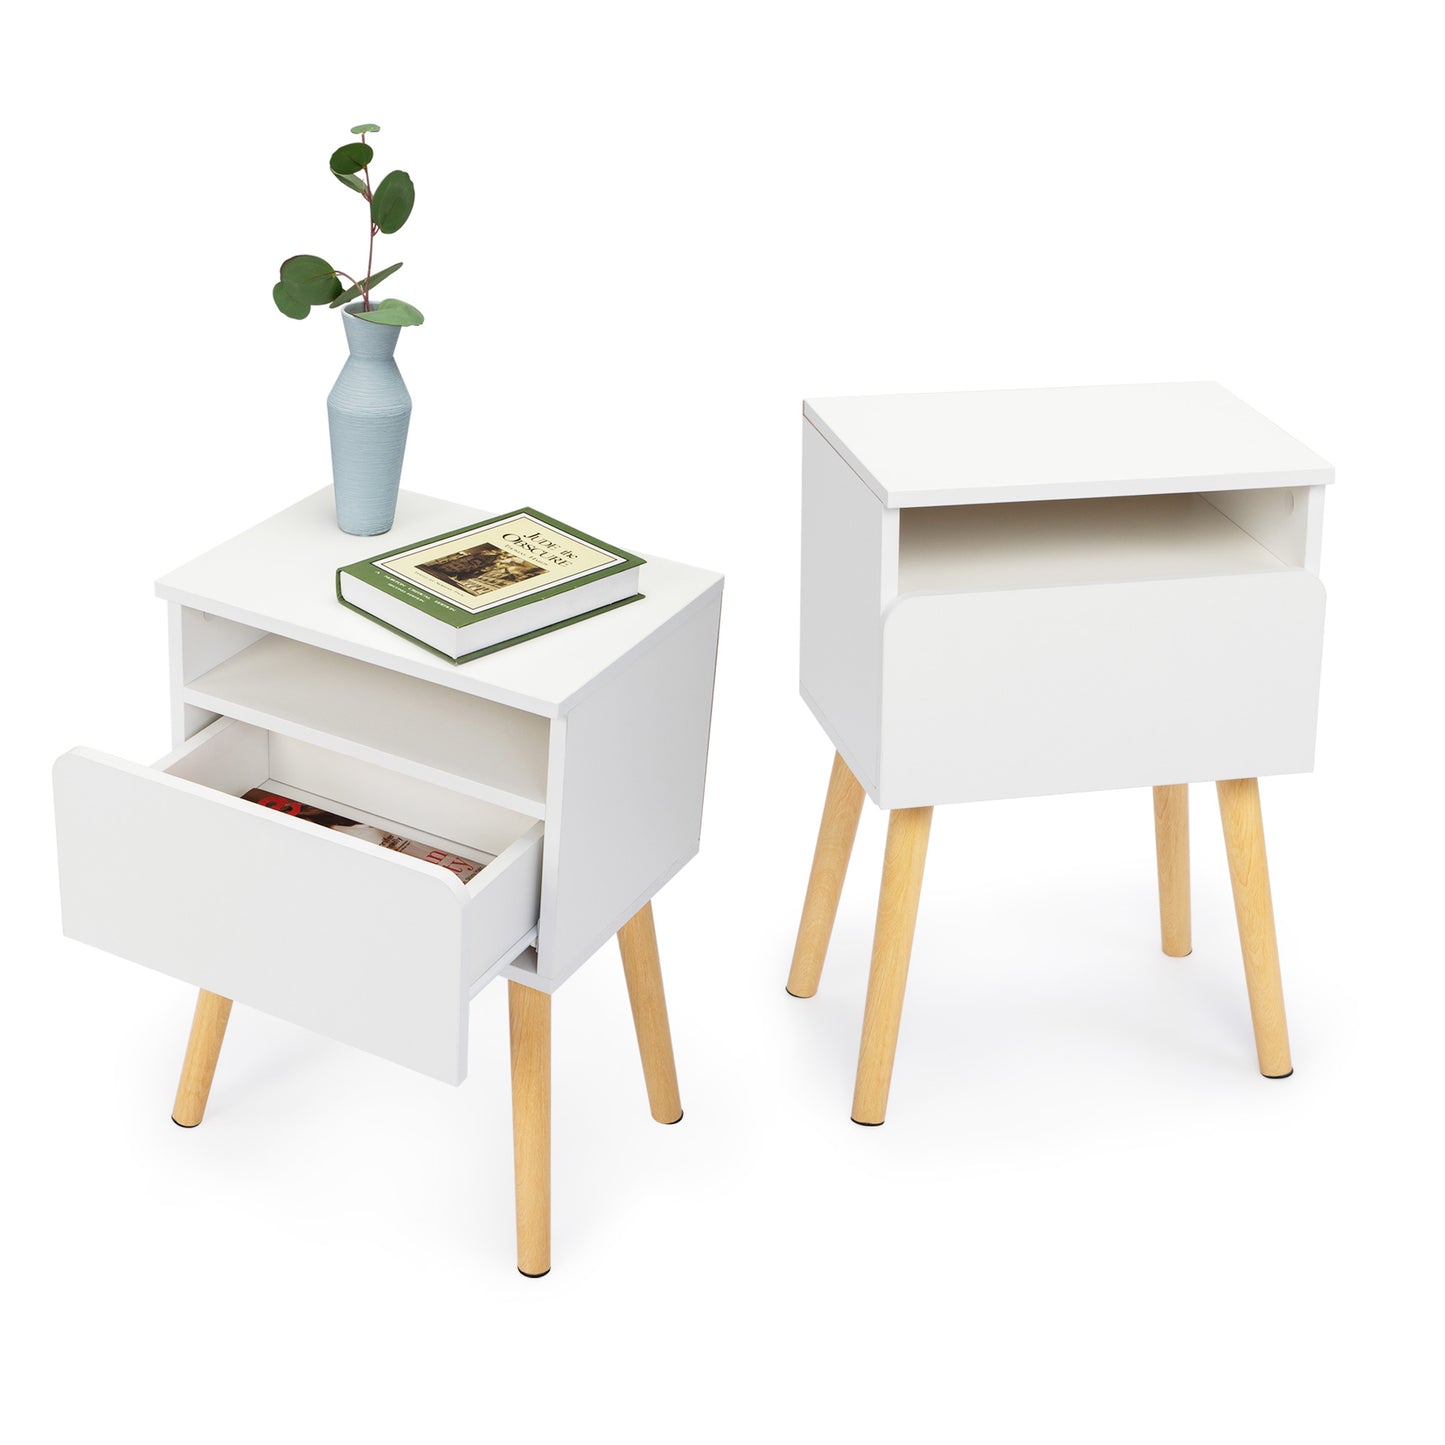 SYNGAR End Table Set of 2, Modern Bed Side Table Nightstand with Drawers, Bedside Table for Bedroom, White, LJ161